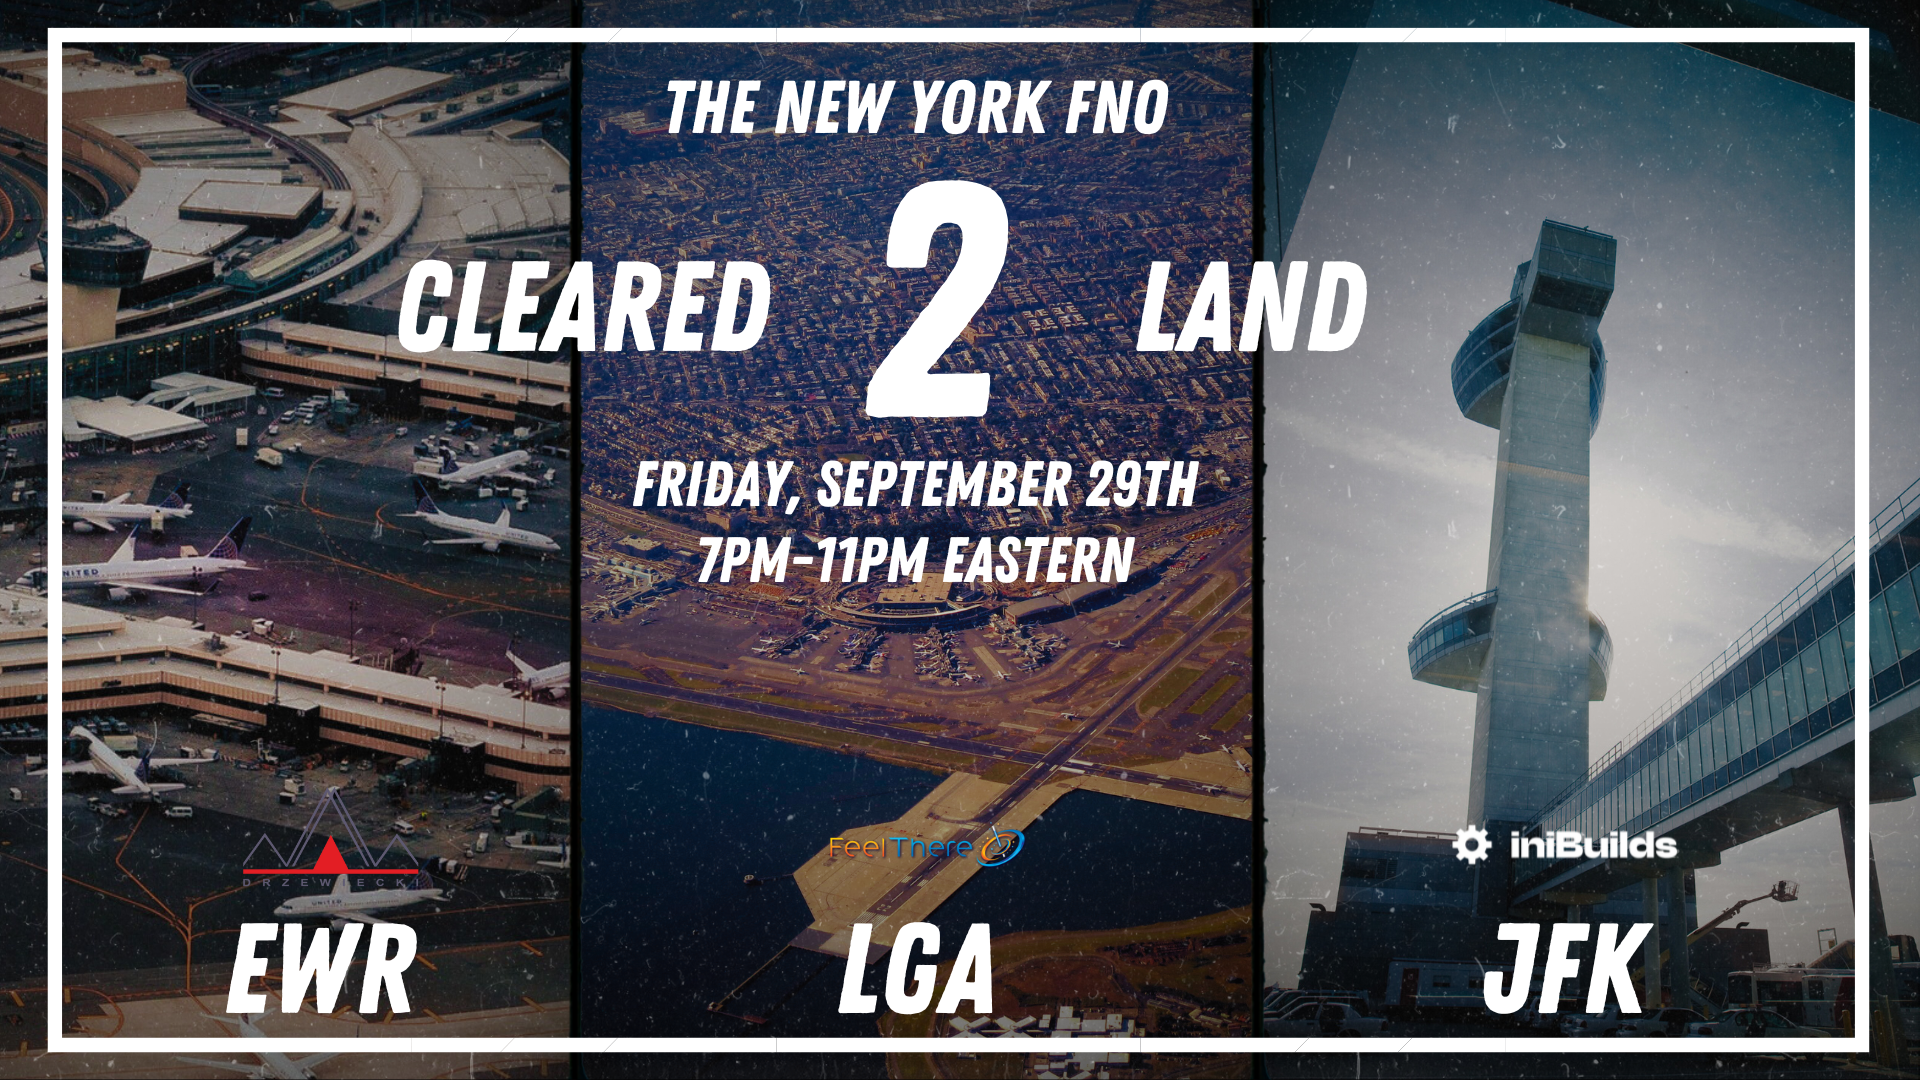 New York FNO Cleared 2 Land